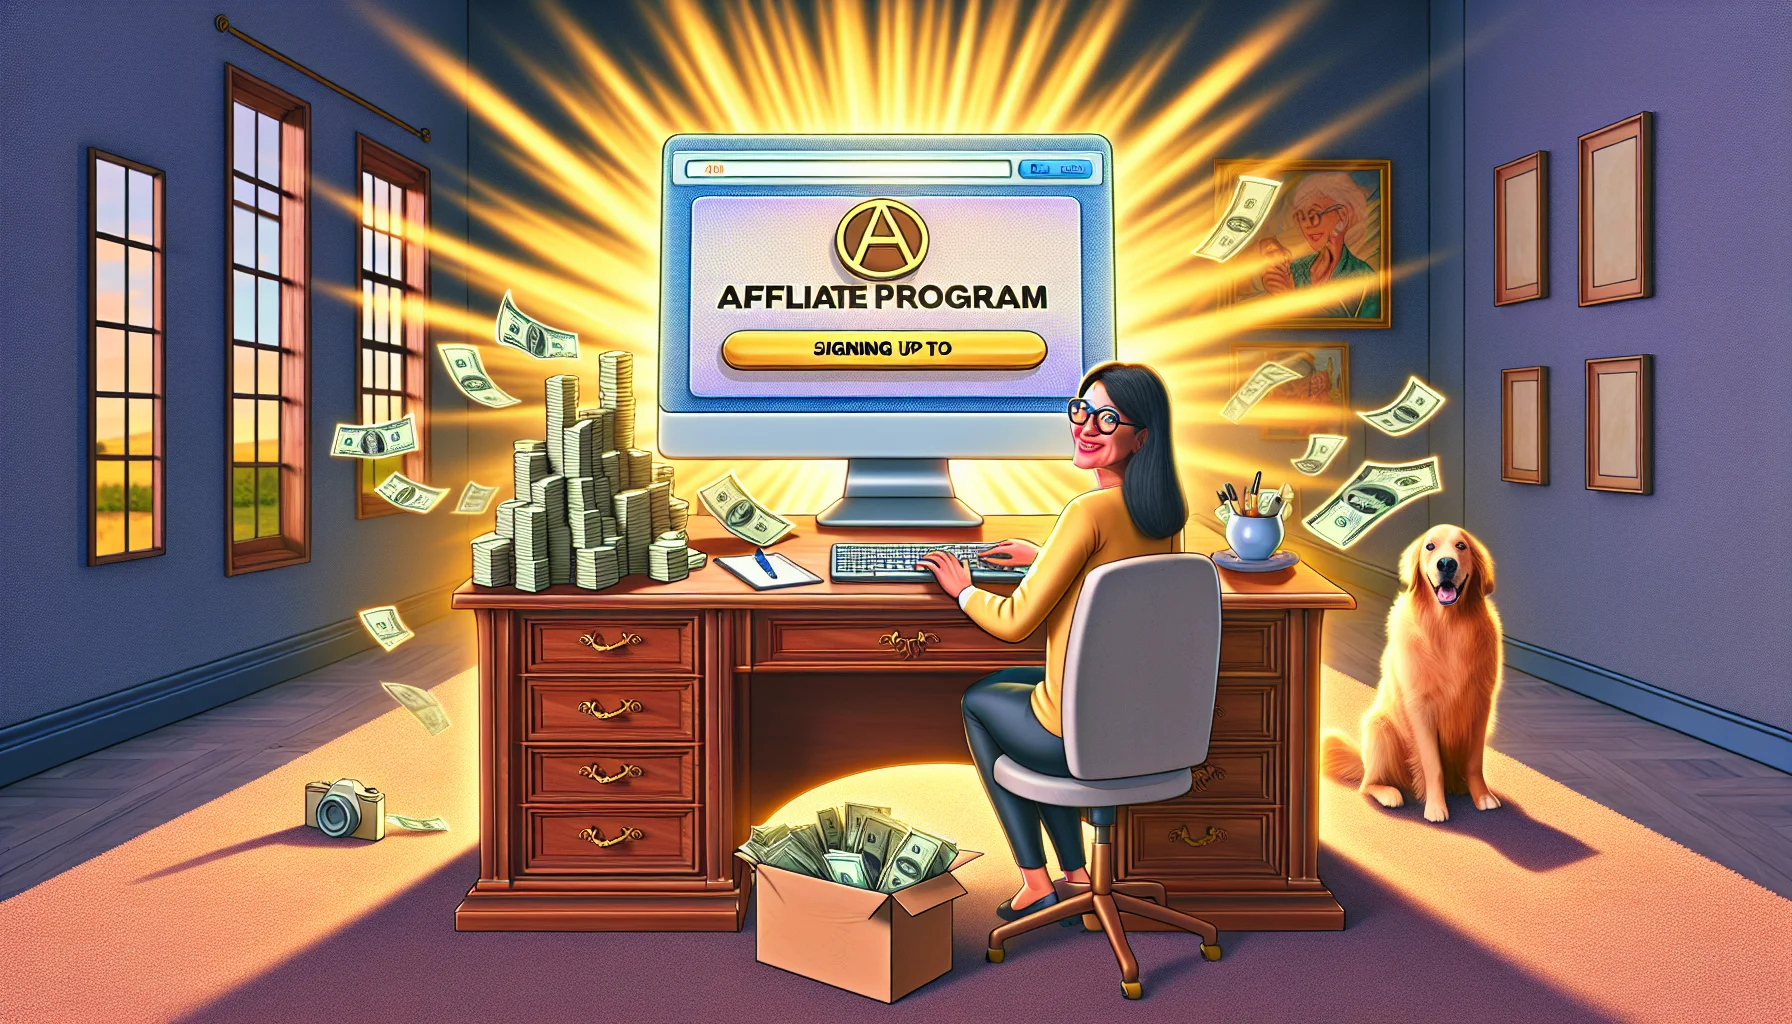 Imagine an amusing scene related to earning online income. In this scene, there's a person signing up for an affiliate program. They are sitting at a grand mahogany desk in front of a large, high-tech computer screen that displays the affiliate program's logo. On one side, there's a stack of money symbolizing potential earnings. In the background, a golden-yellow aura radiates, signifying richness and success. This person is middle-aged, South Asian woman wearing glasses and a confident smile, symbolizing an inclusive representation of the people typically underrepresented in such pursuits. The room has a comedic element - a playful golden retriever chasing its tail, adding lightness to an otherwise intense setting.